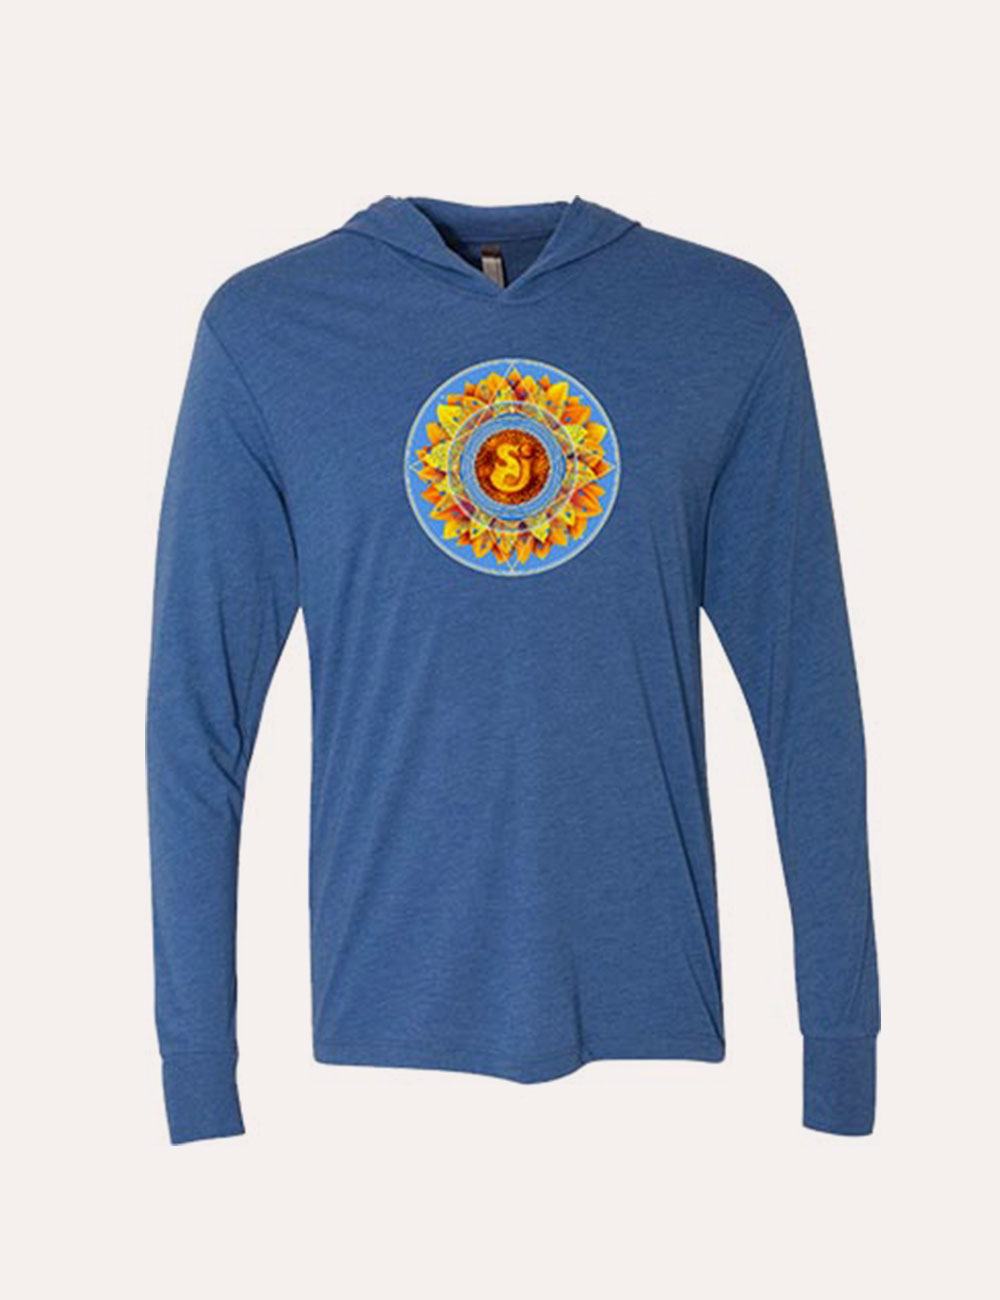 The String Cheese Incident - T-shirts- Unisex long sleeve hooded medallion graphic